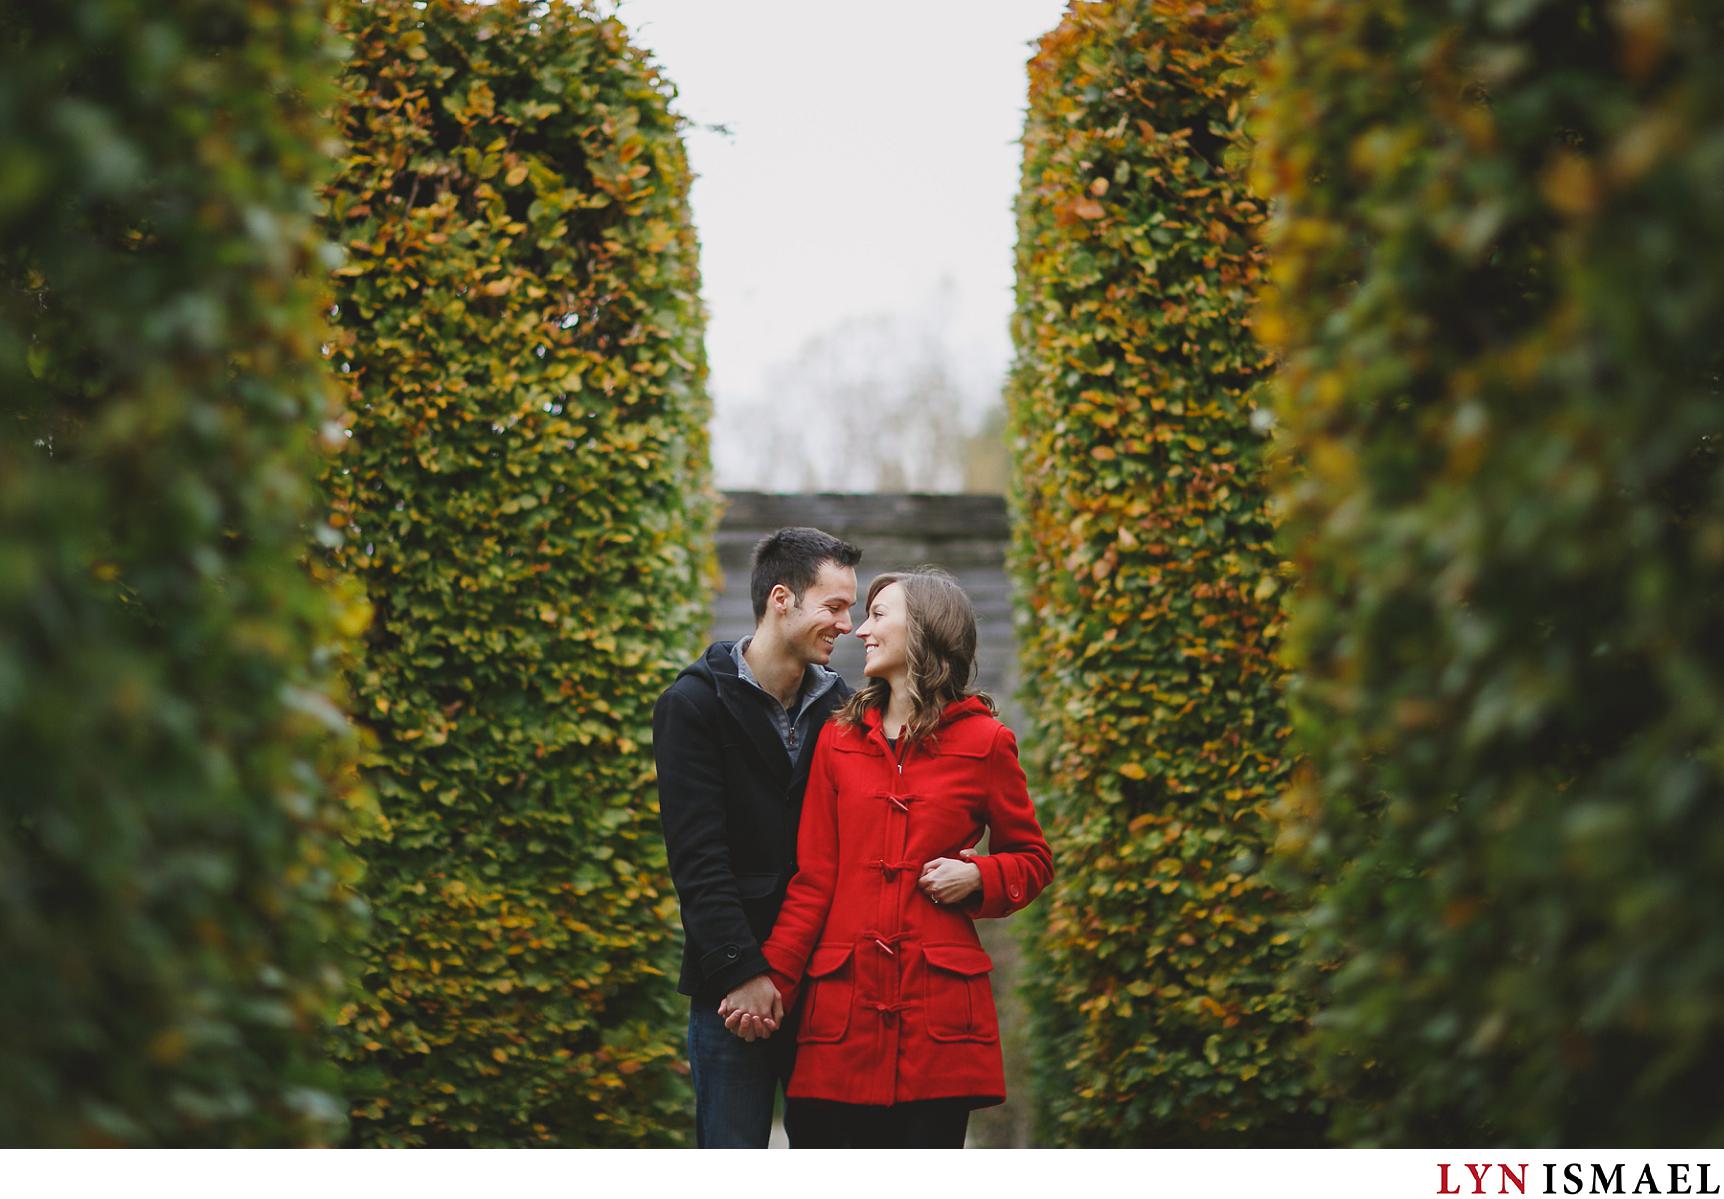 A couple at the University of Guelph's Arboretum poses in front of a modern Guelph photographer for their engagement photos